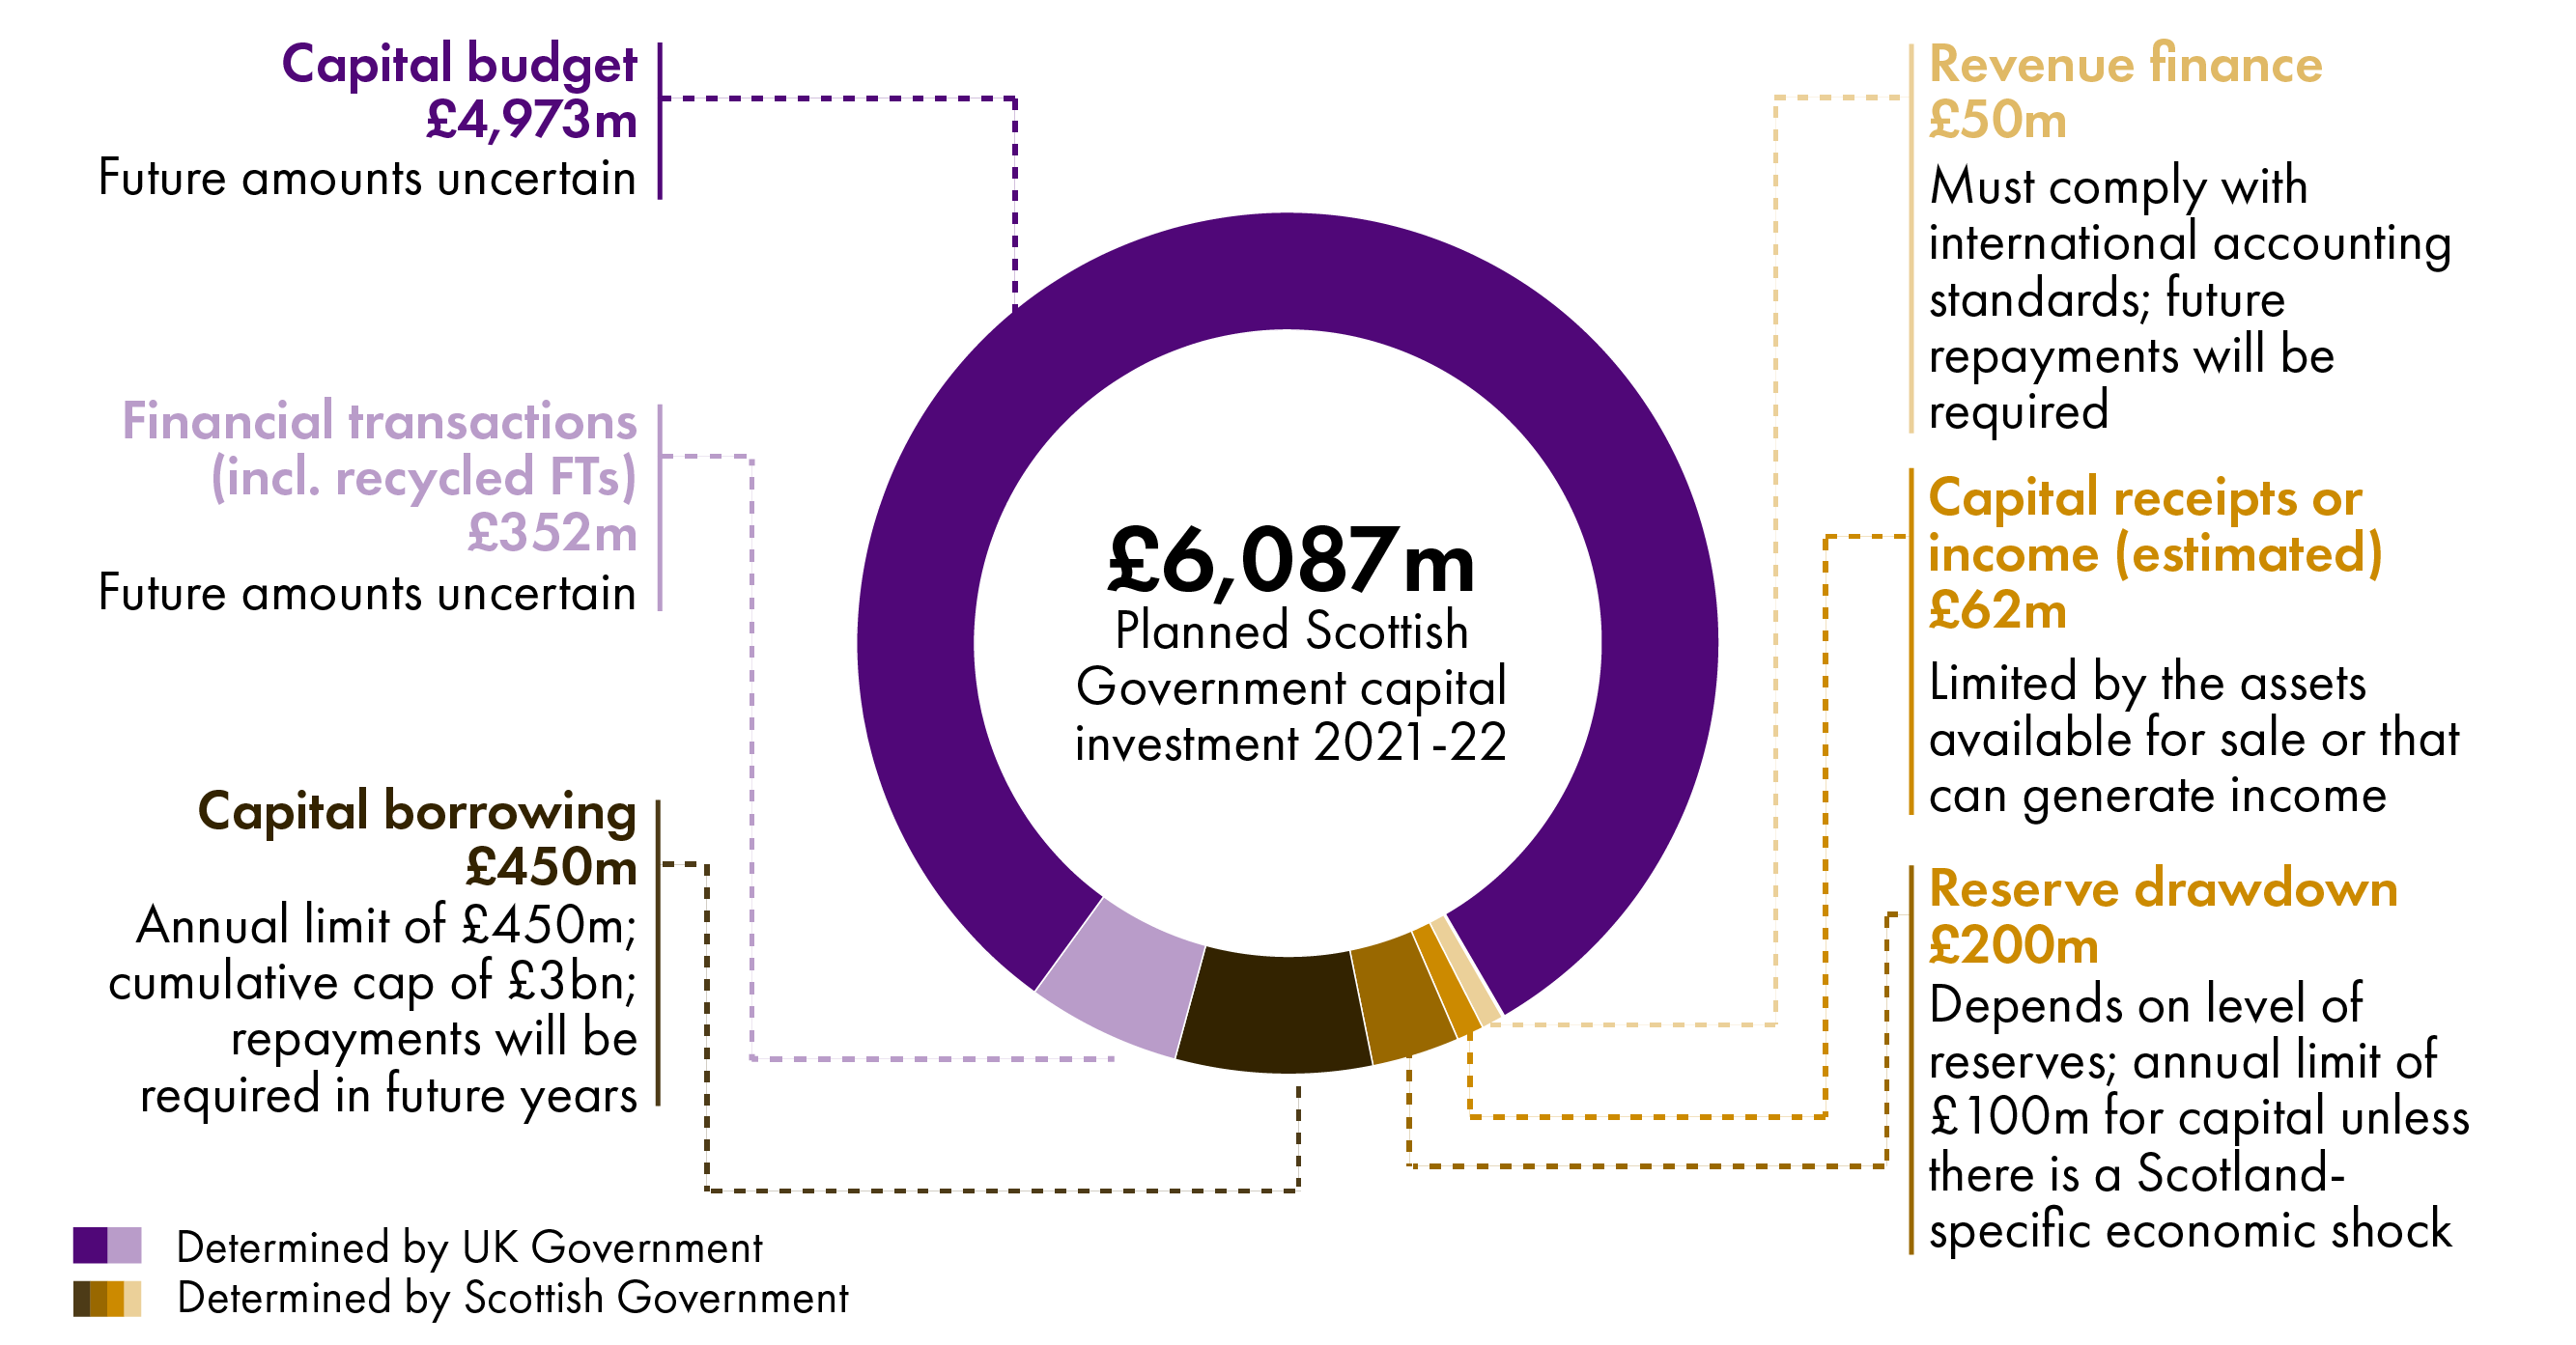 Currently, 87% of the Scottish Government's capital investment budget is determined by the UK Government, with amounts for future years yet to be determined